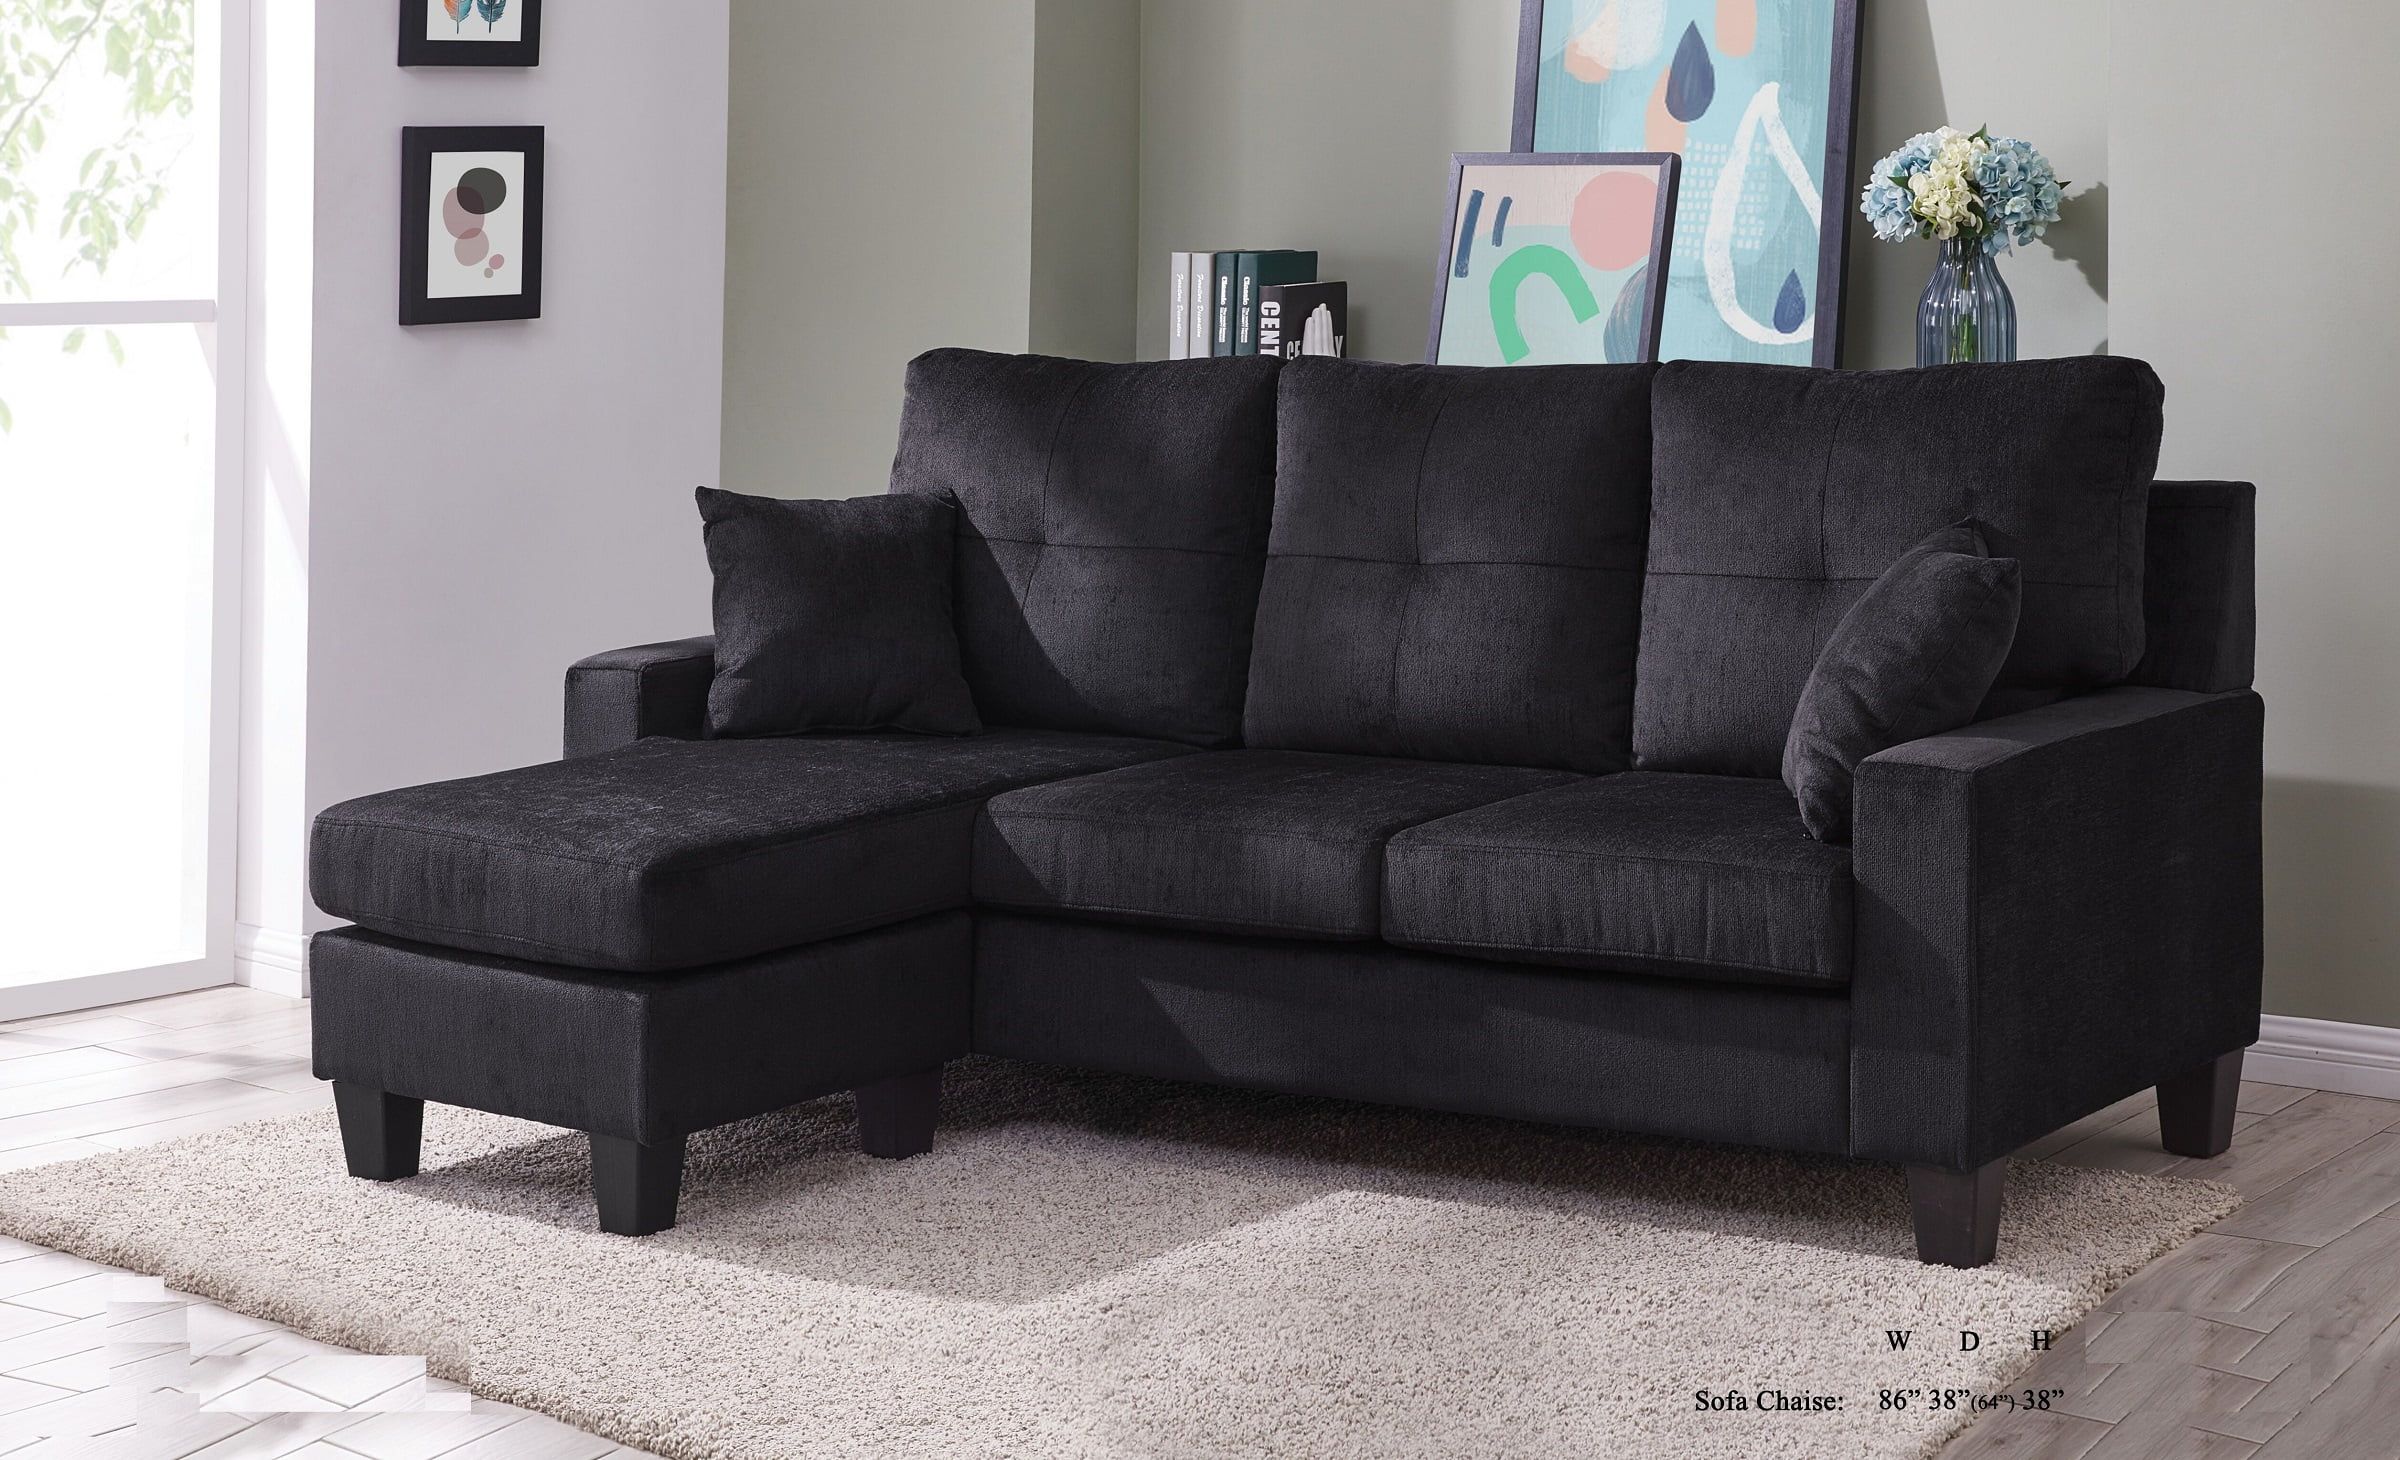 Sectional Sofa Set Black Fabric Tufted Cushion Sofa Chaise Small Space Pertaining To Sofas In Black (View 12 of 20)